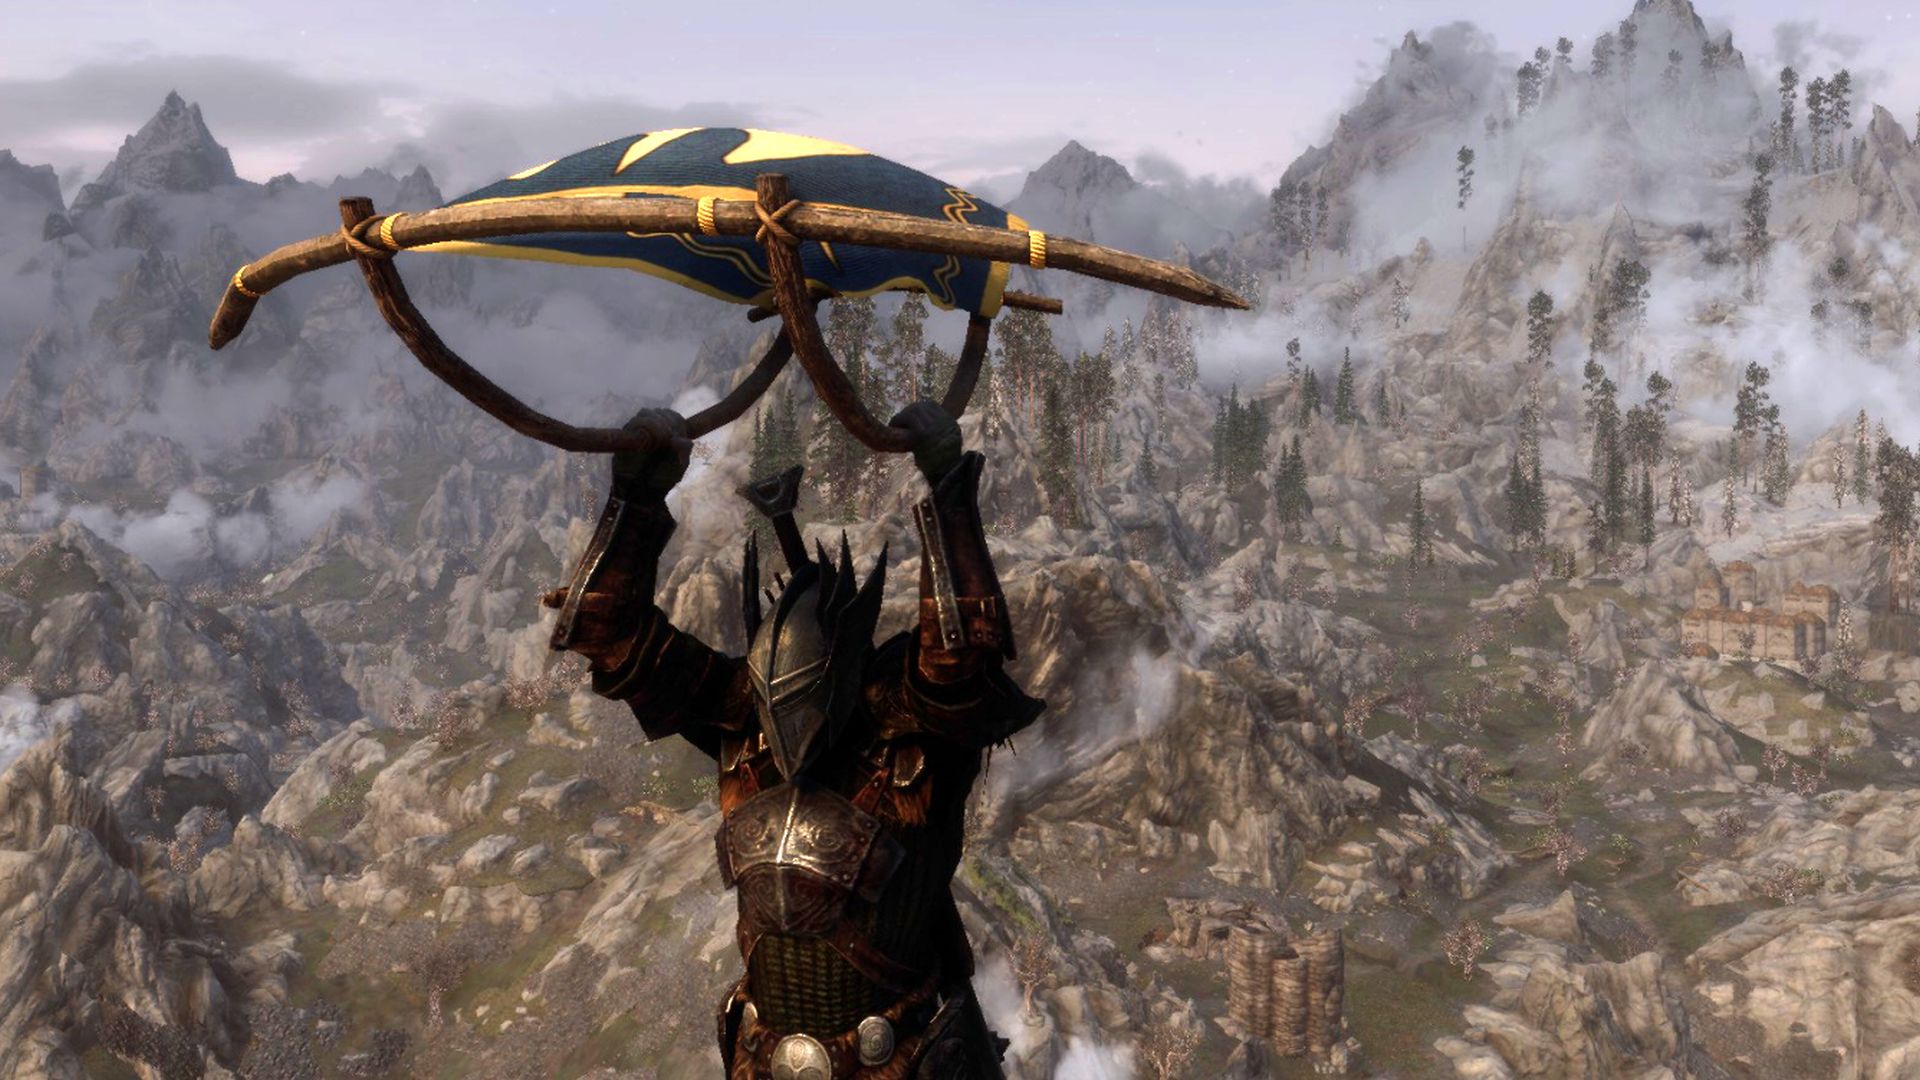 Skyrim modders have made a working, Breath of the Wild-style paraglider